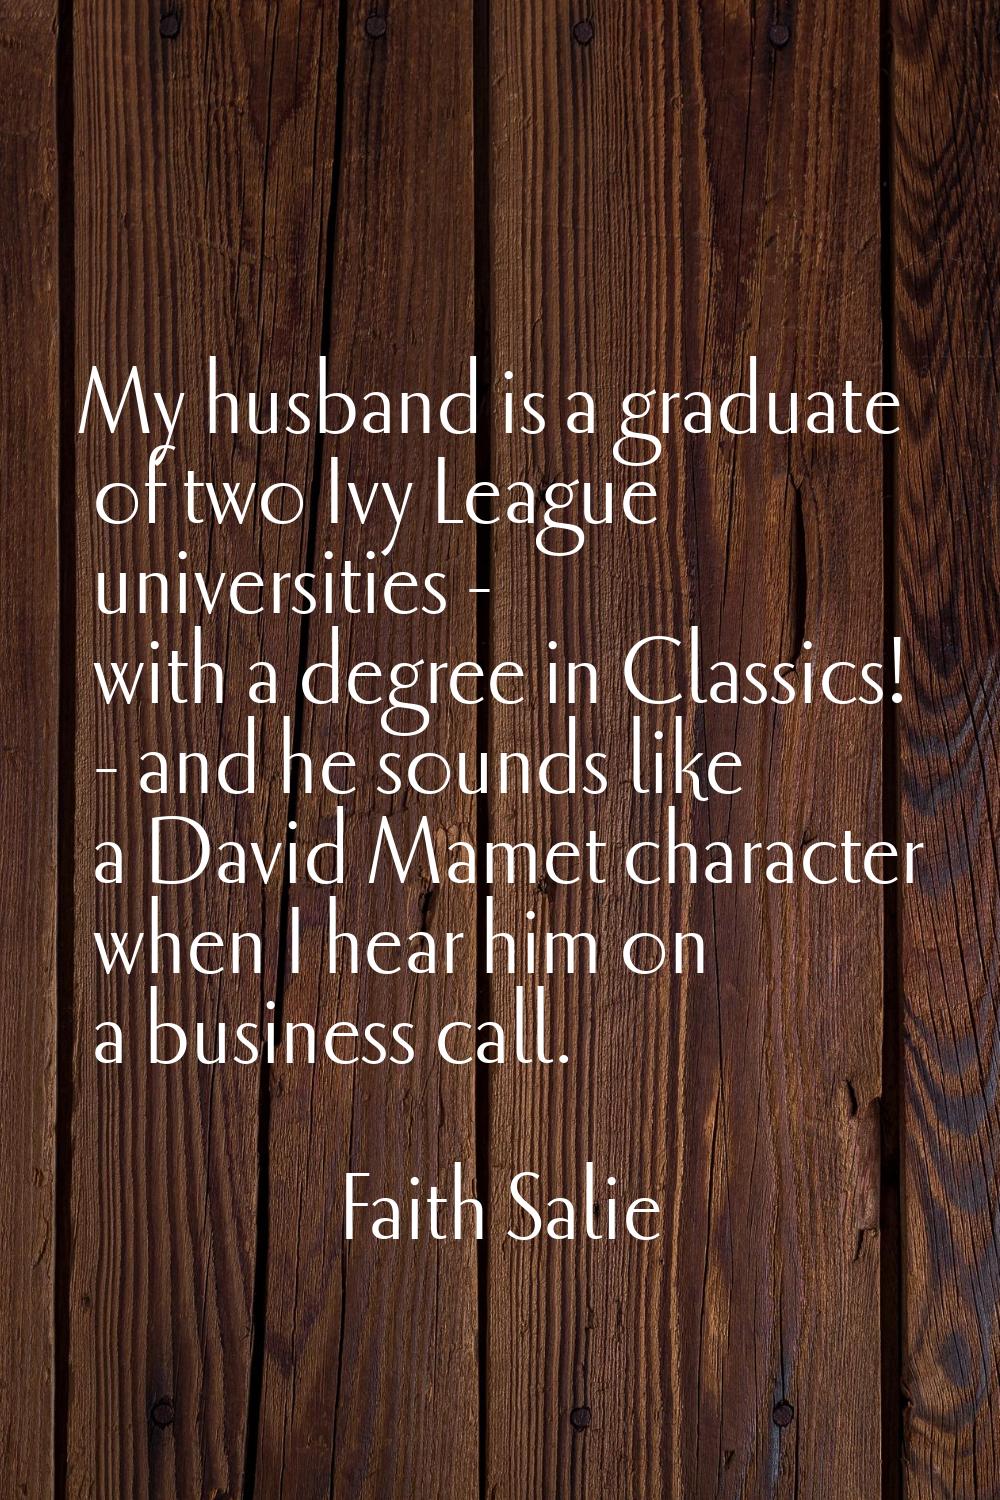 My husband is a graduate of two Ivy League universities - with a degree in Classics! - and he sound